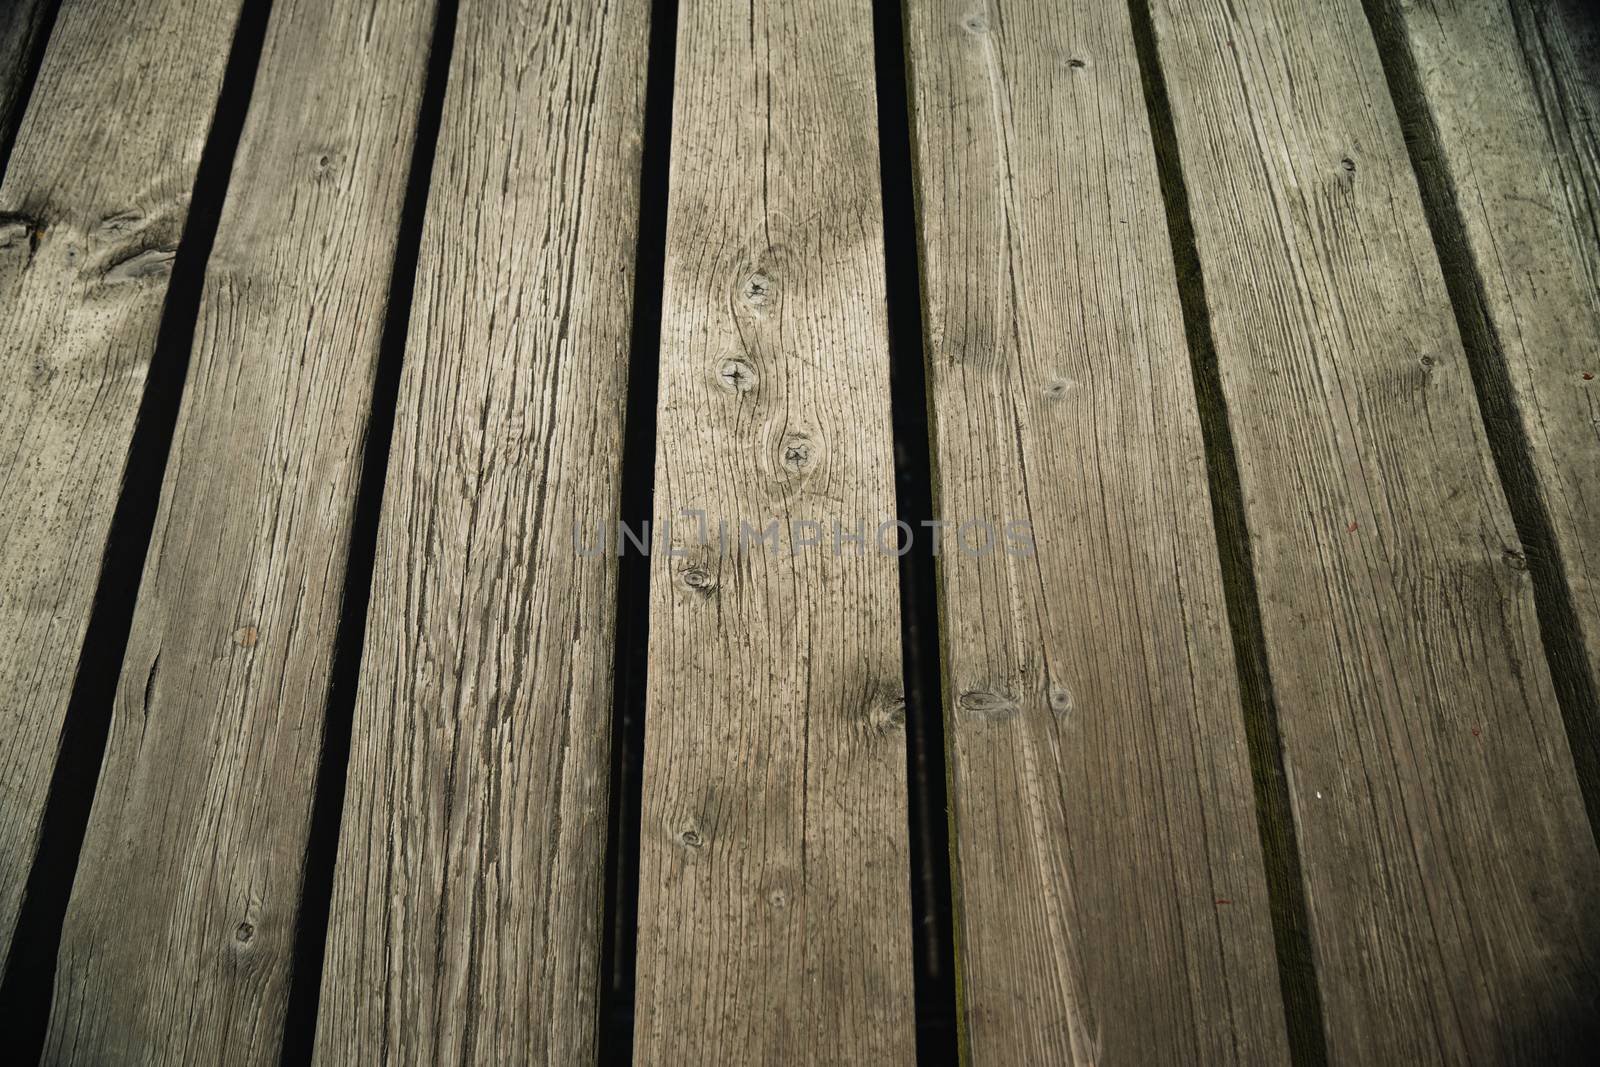 Pier Wooden Planks by samULvisuals